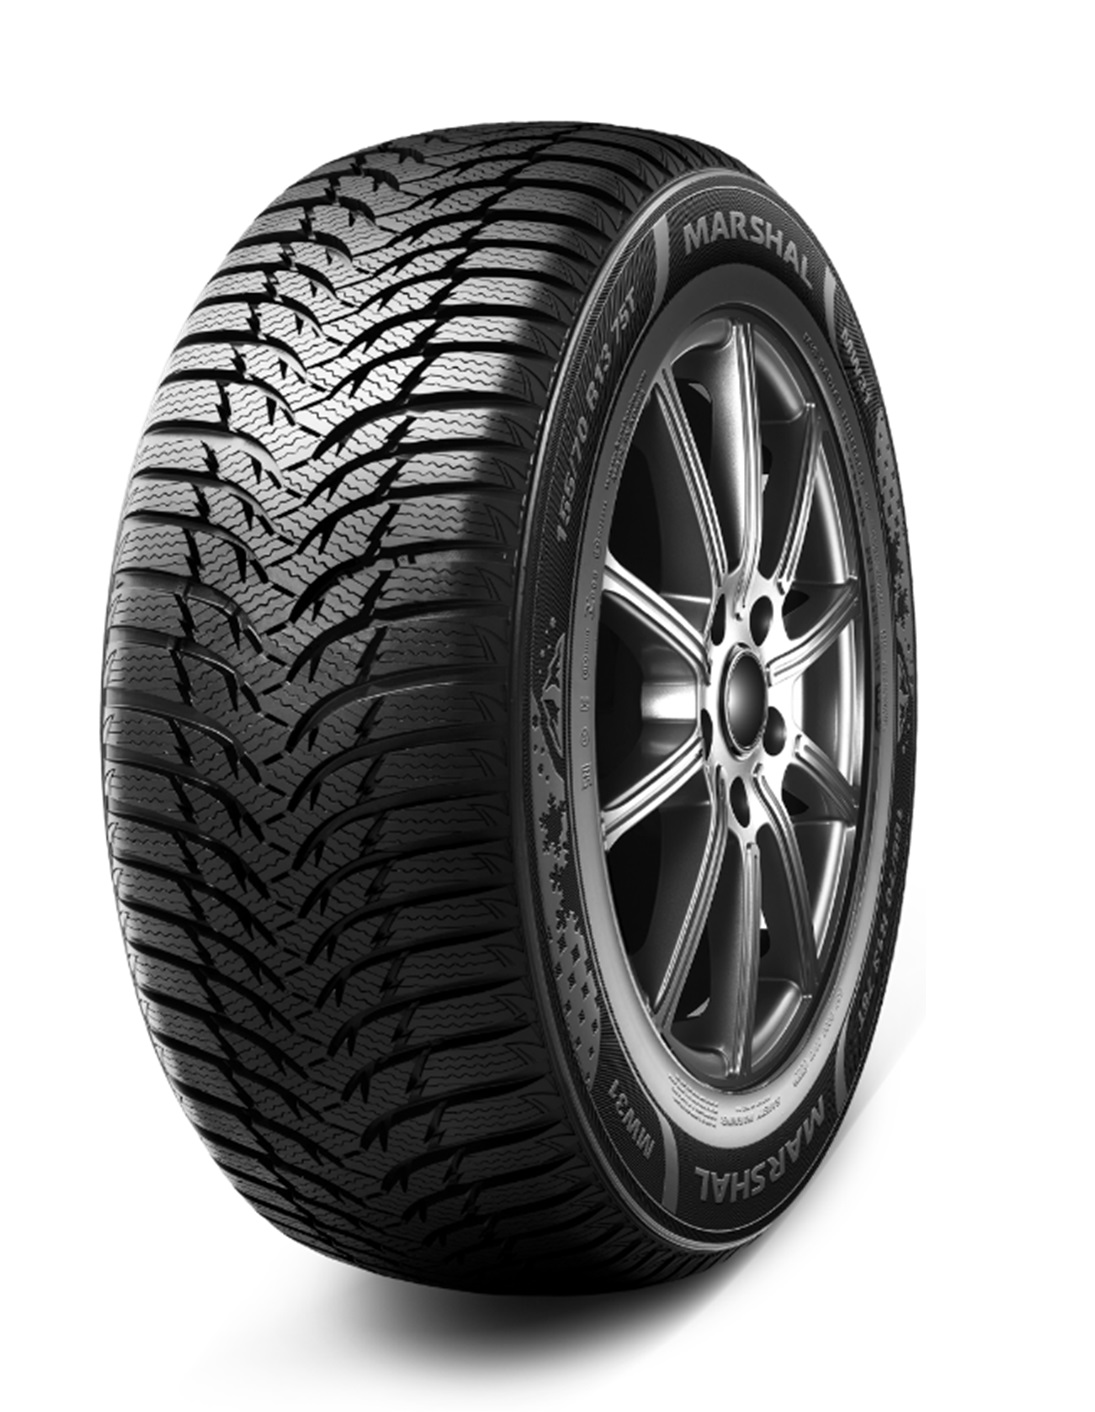 Gomme Nuove Marshal 205/55 R16 91H MW31 M+S pneumatici nuovi Invernale